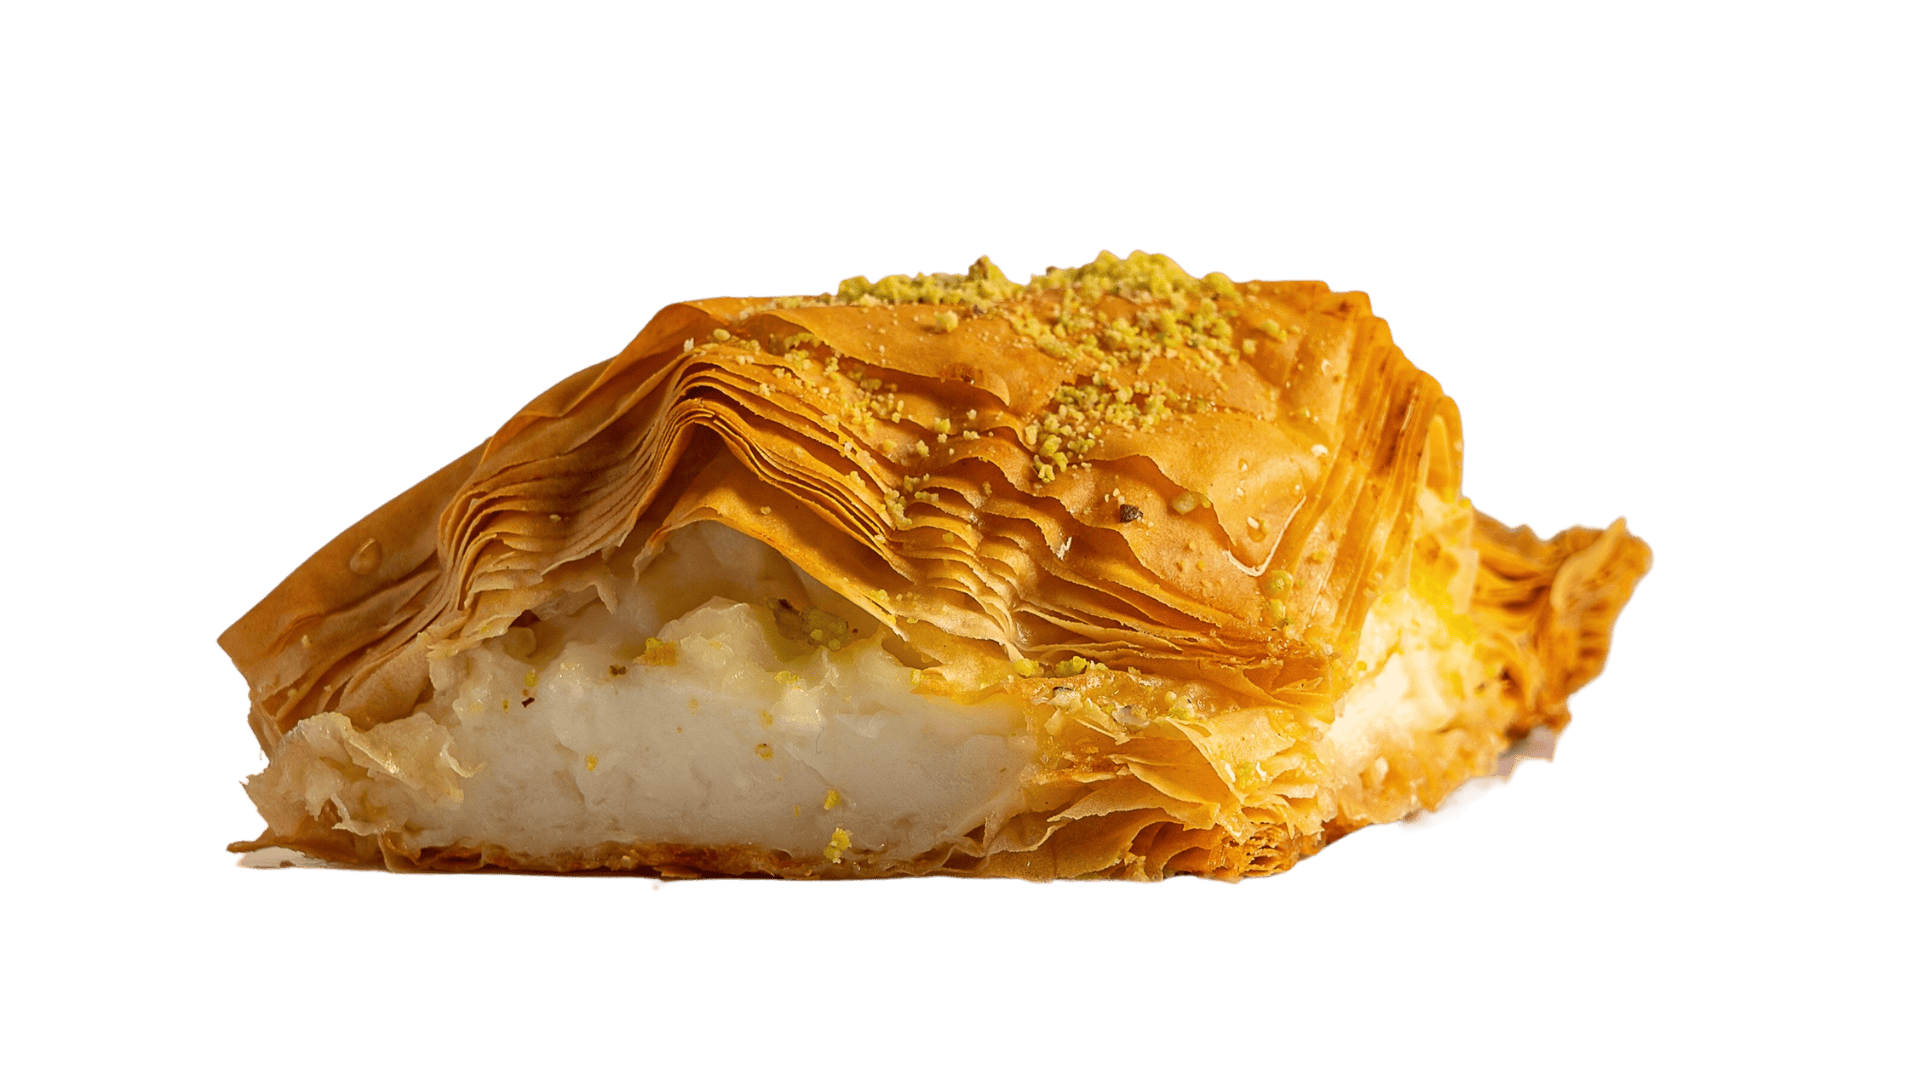 A piece of Shaabiyat pastry from Pâtisserie Le Caramel, Ottawa, Ontario.